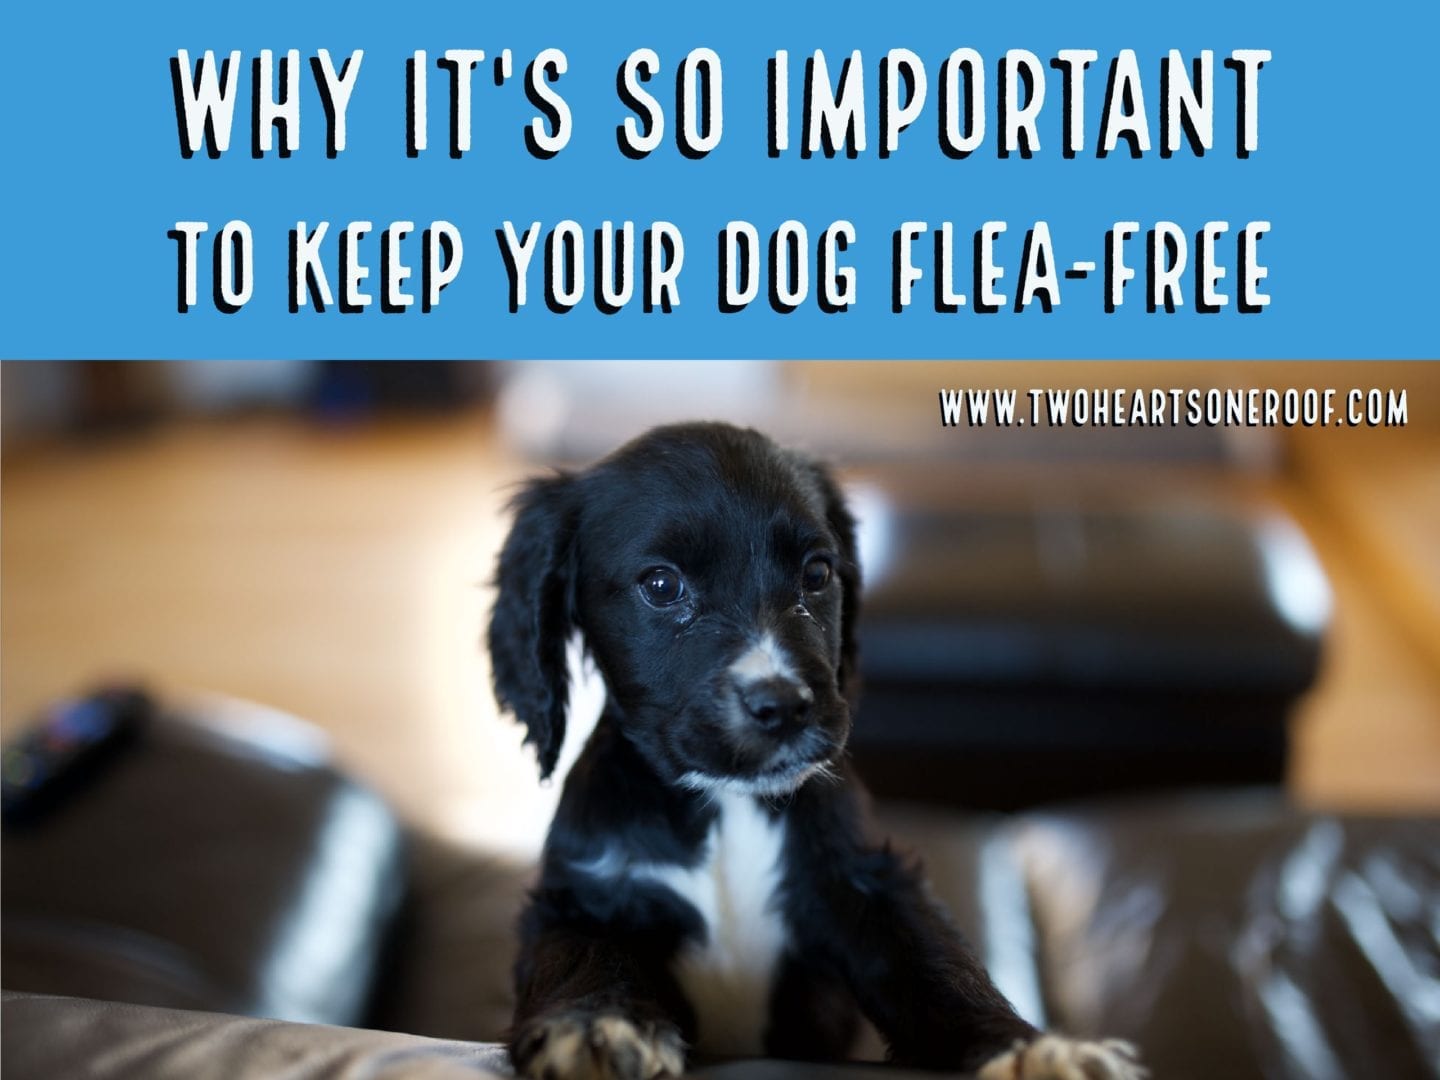 Why It’s So Important To Keep Your Dog Flea-Free